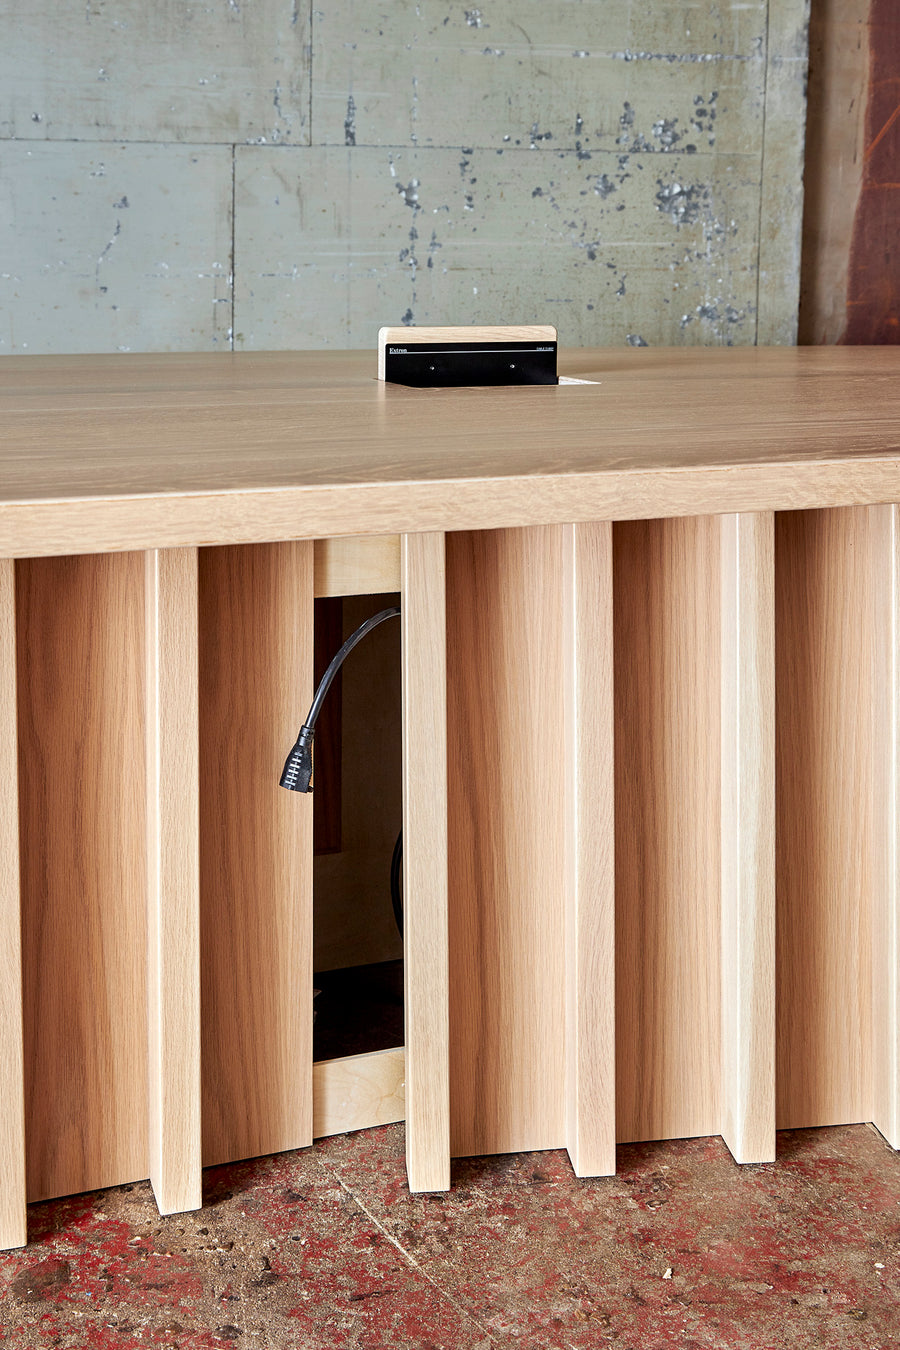 conference table removable wood panels to conceal power